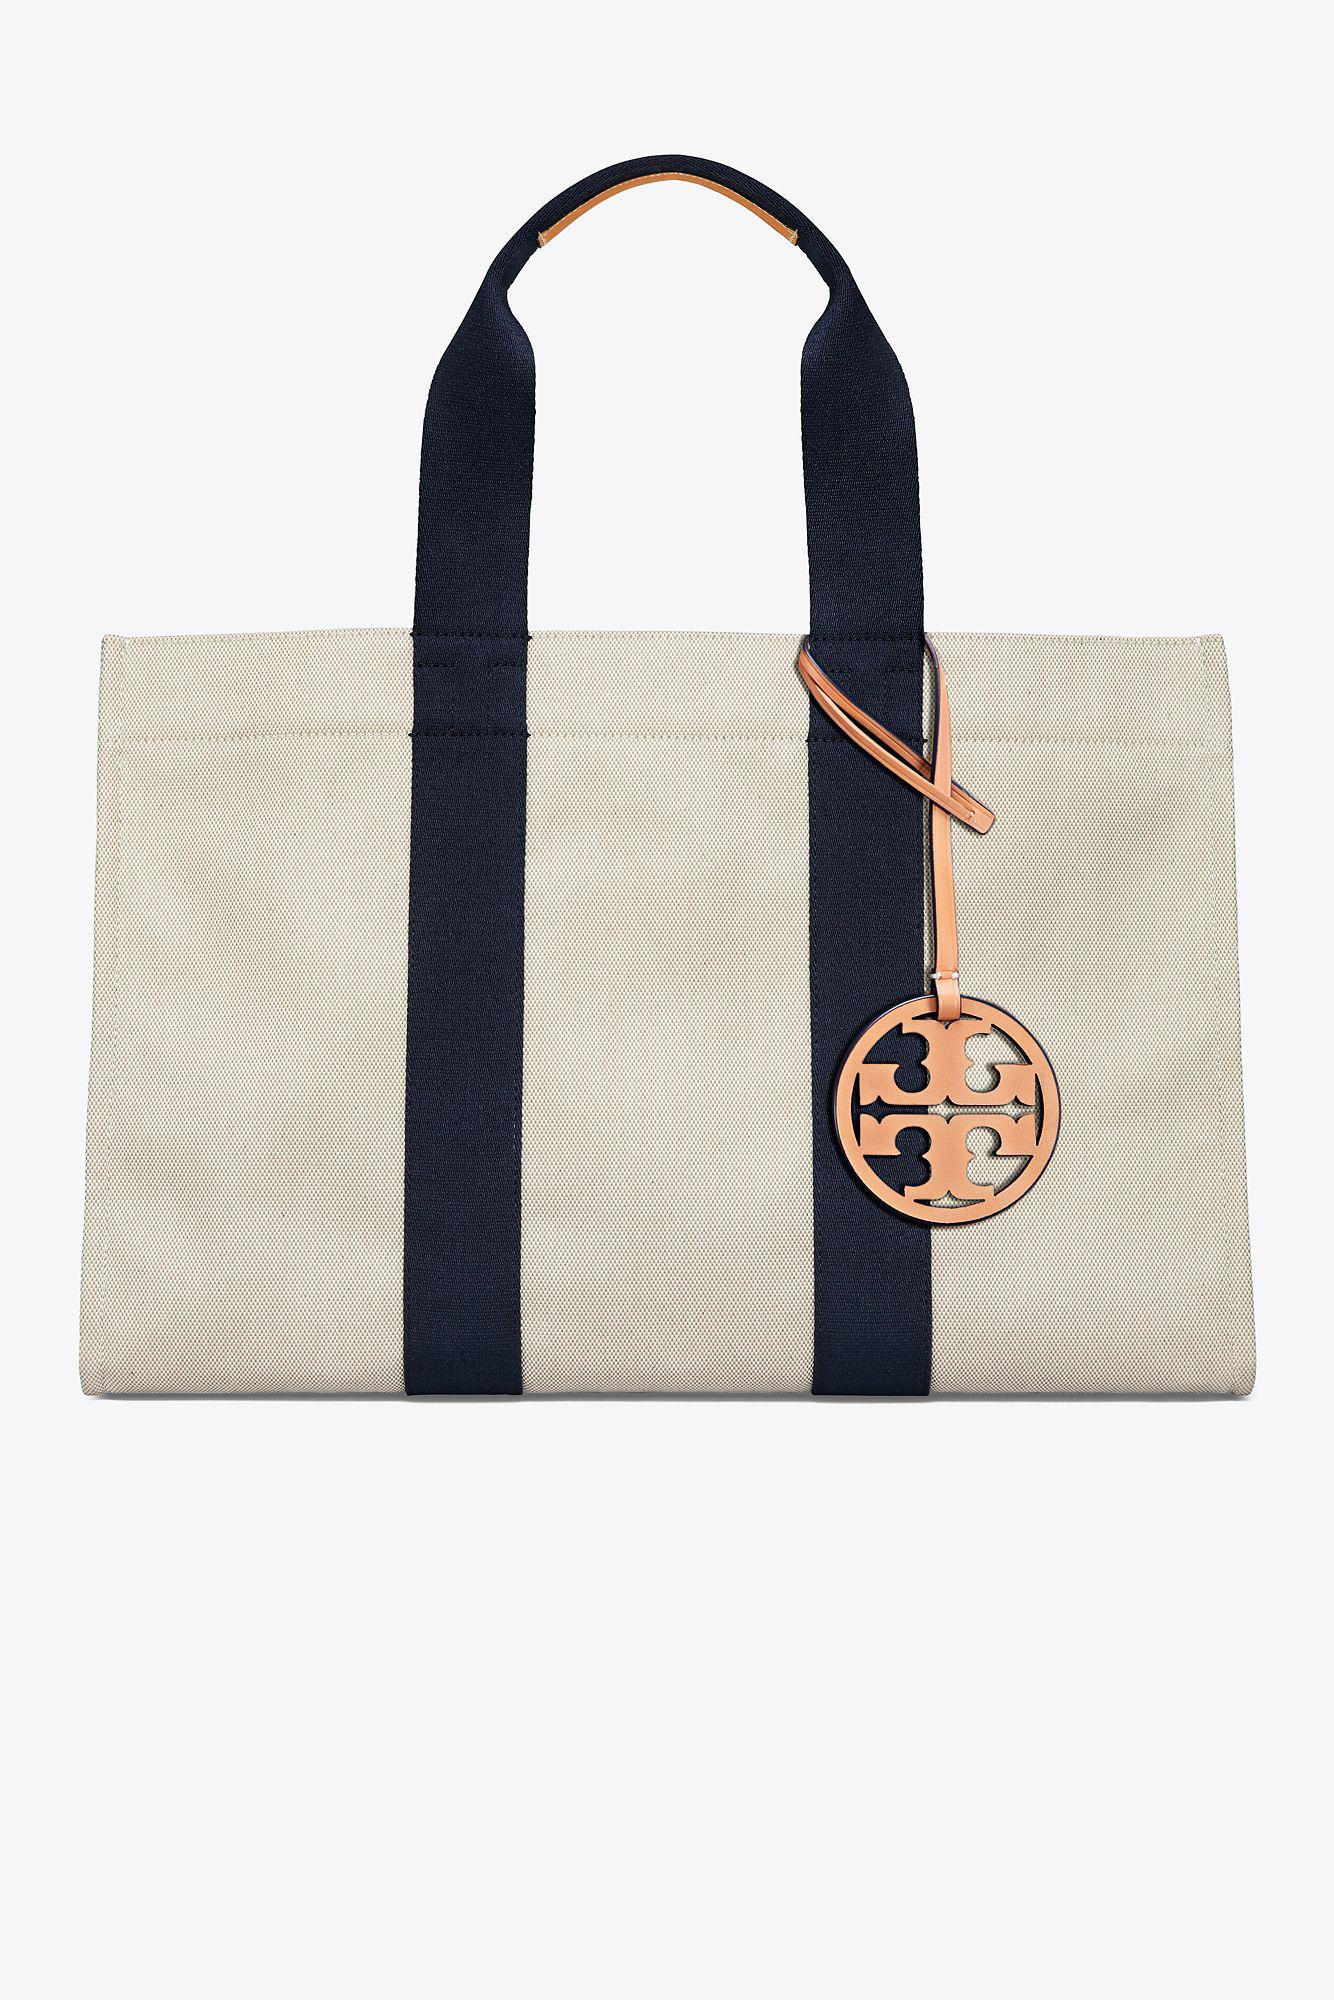 Tory Burch Miller Large Canvas Tote in Blue | Lyst Canada